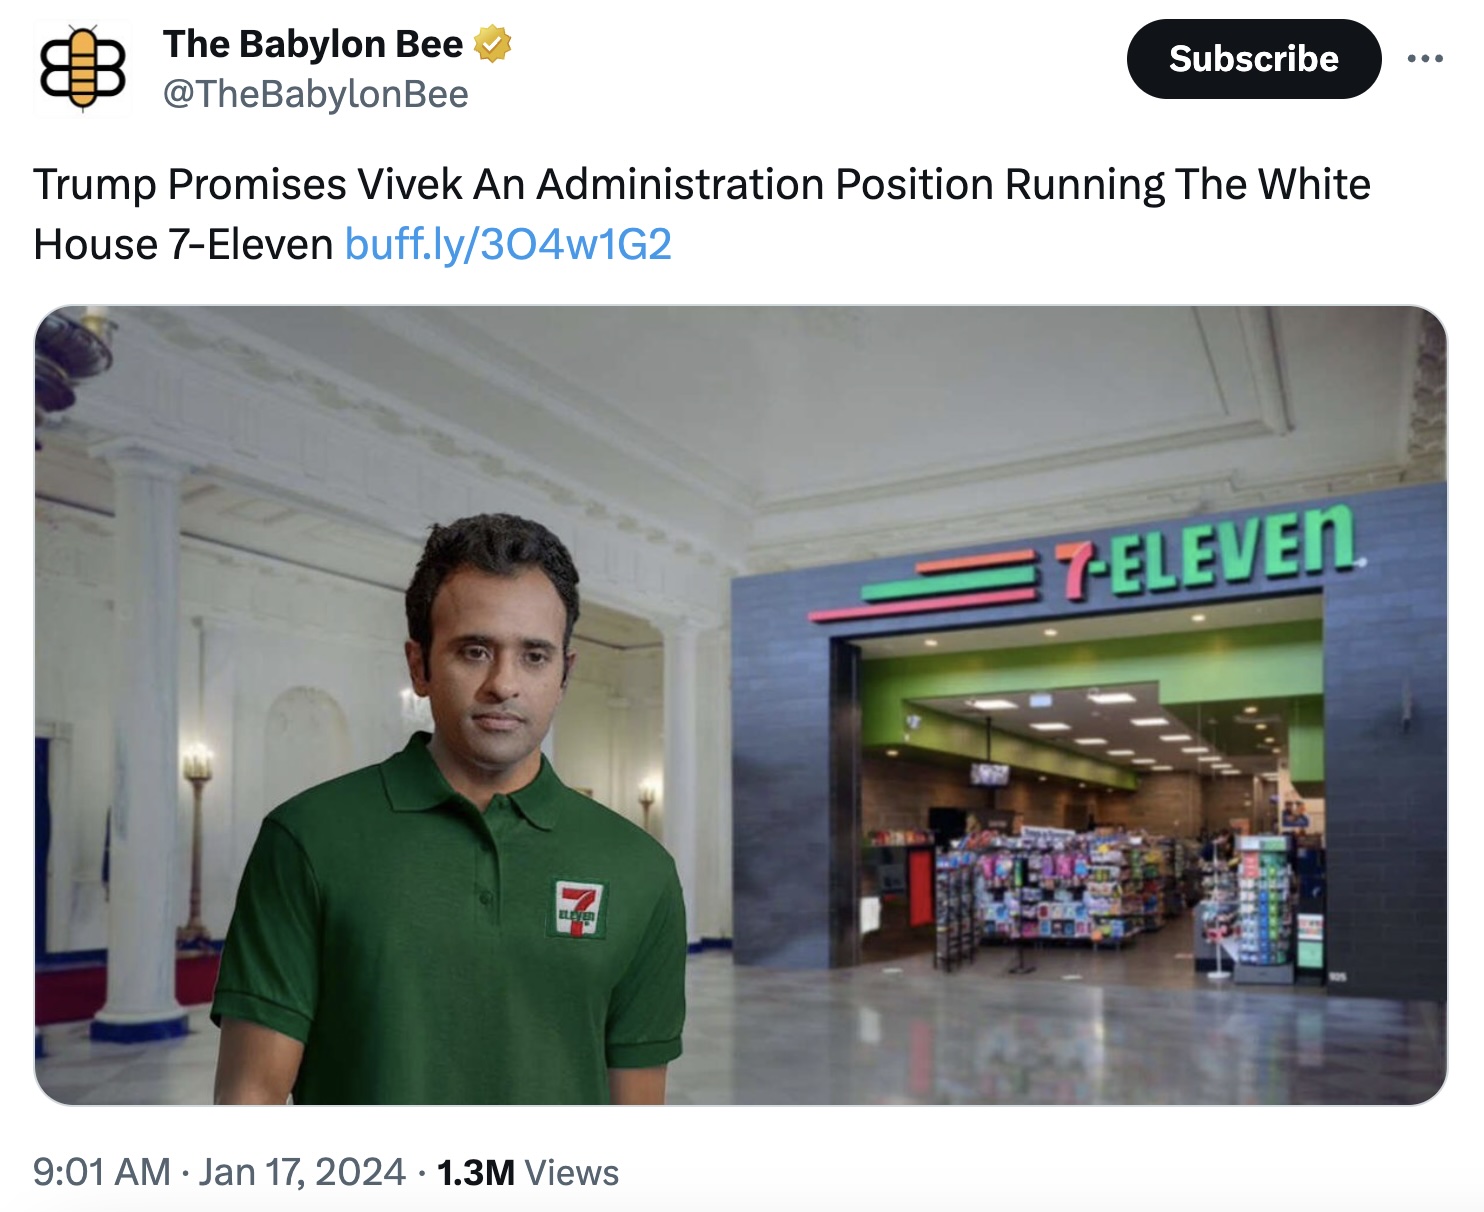 Babylon Bee Receives Backlash After ‘Racist’ Joke About Vivek Ramaswamy Running ‘White House 7-Eleven’